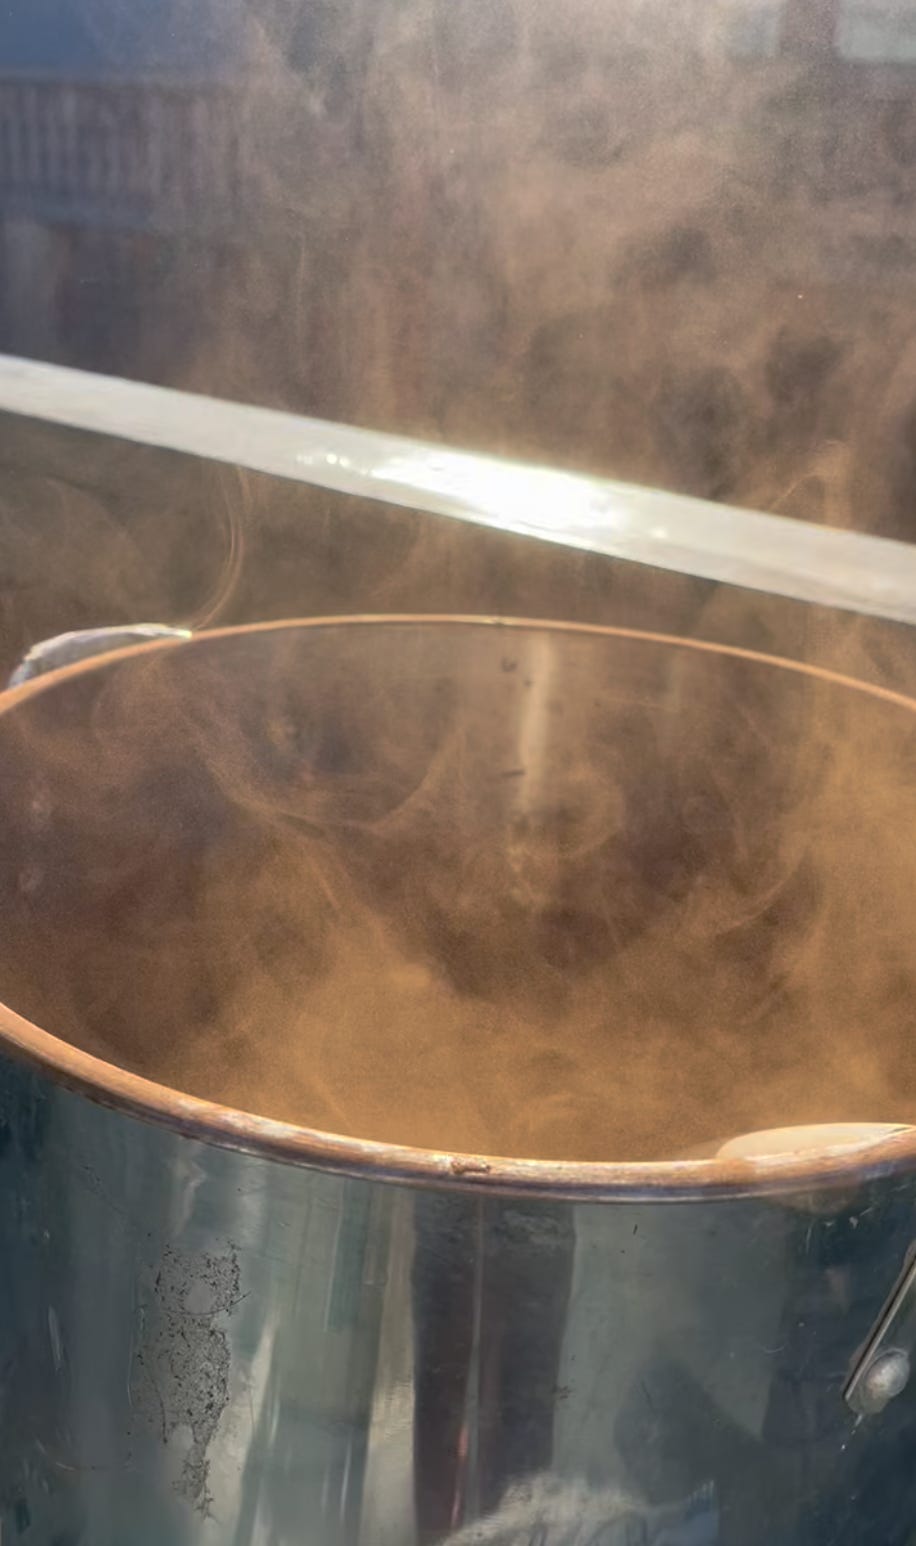 picture of a large silver stock pot, with what looks like brown steam rising from it. the "steam" is the brown of mushroom spores!